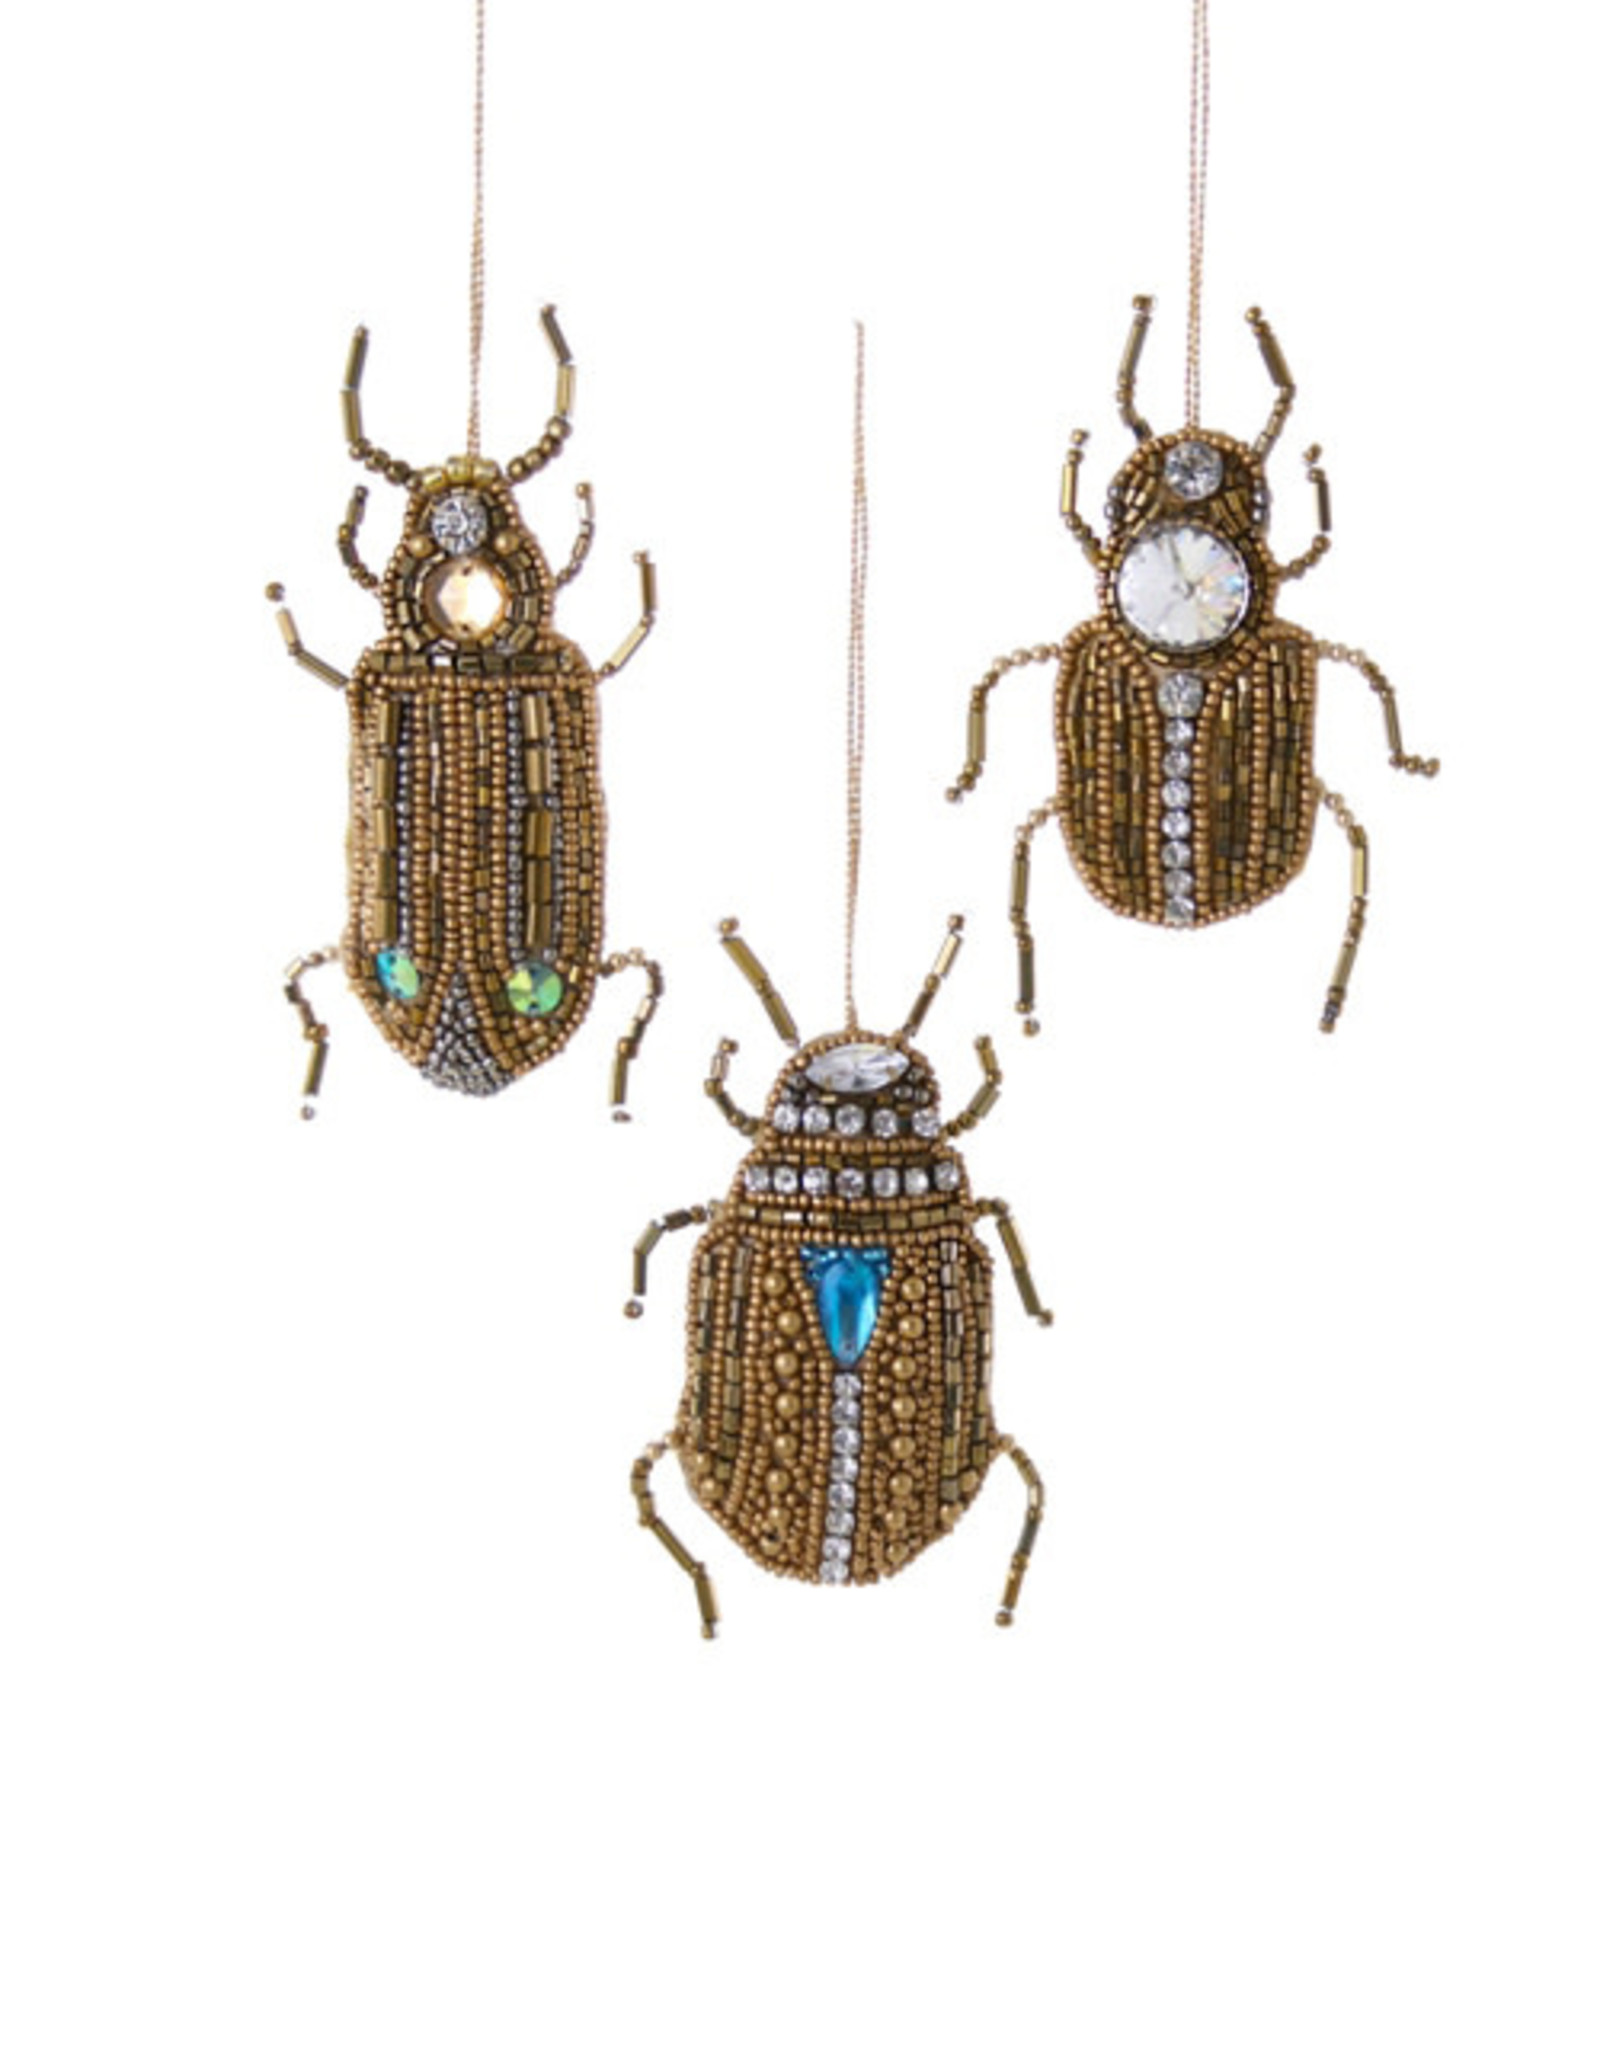 Cody Foster & Co. GOLDEN BEETLES ORNAMENT - 3 STYLES